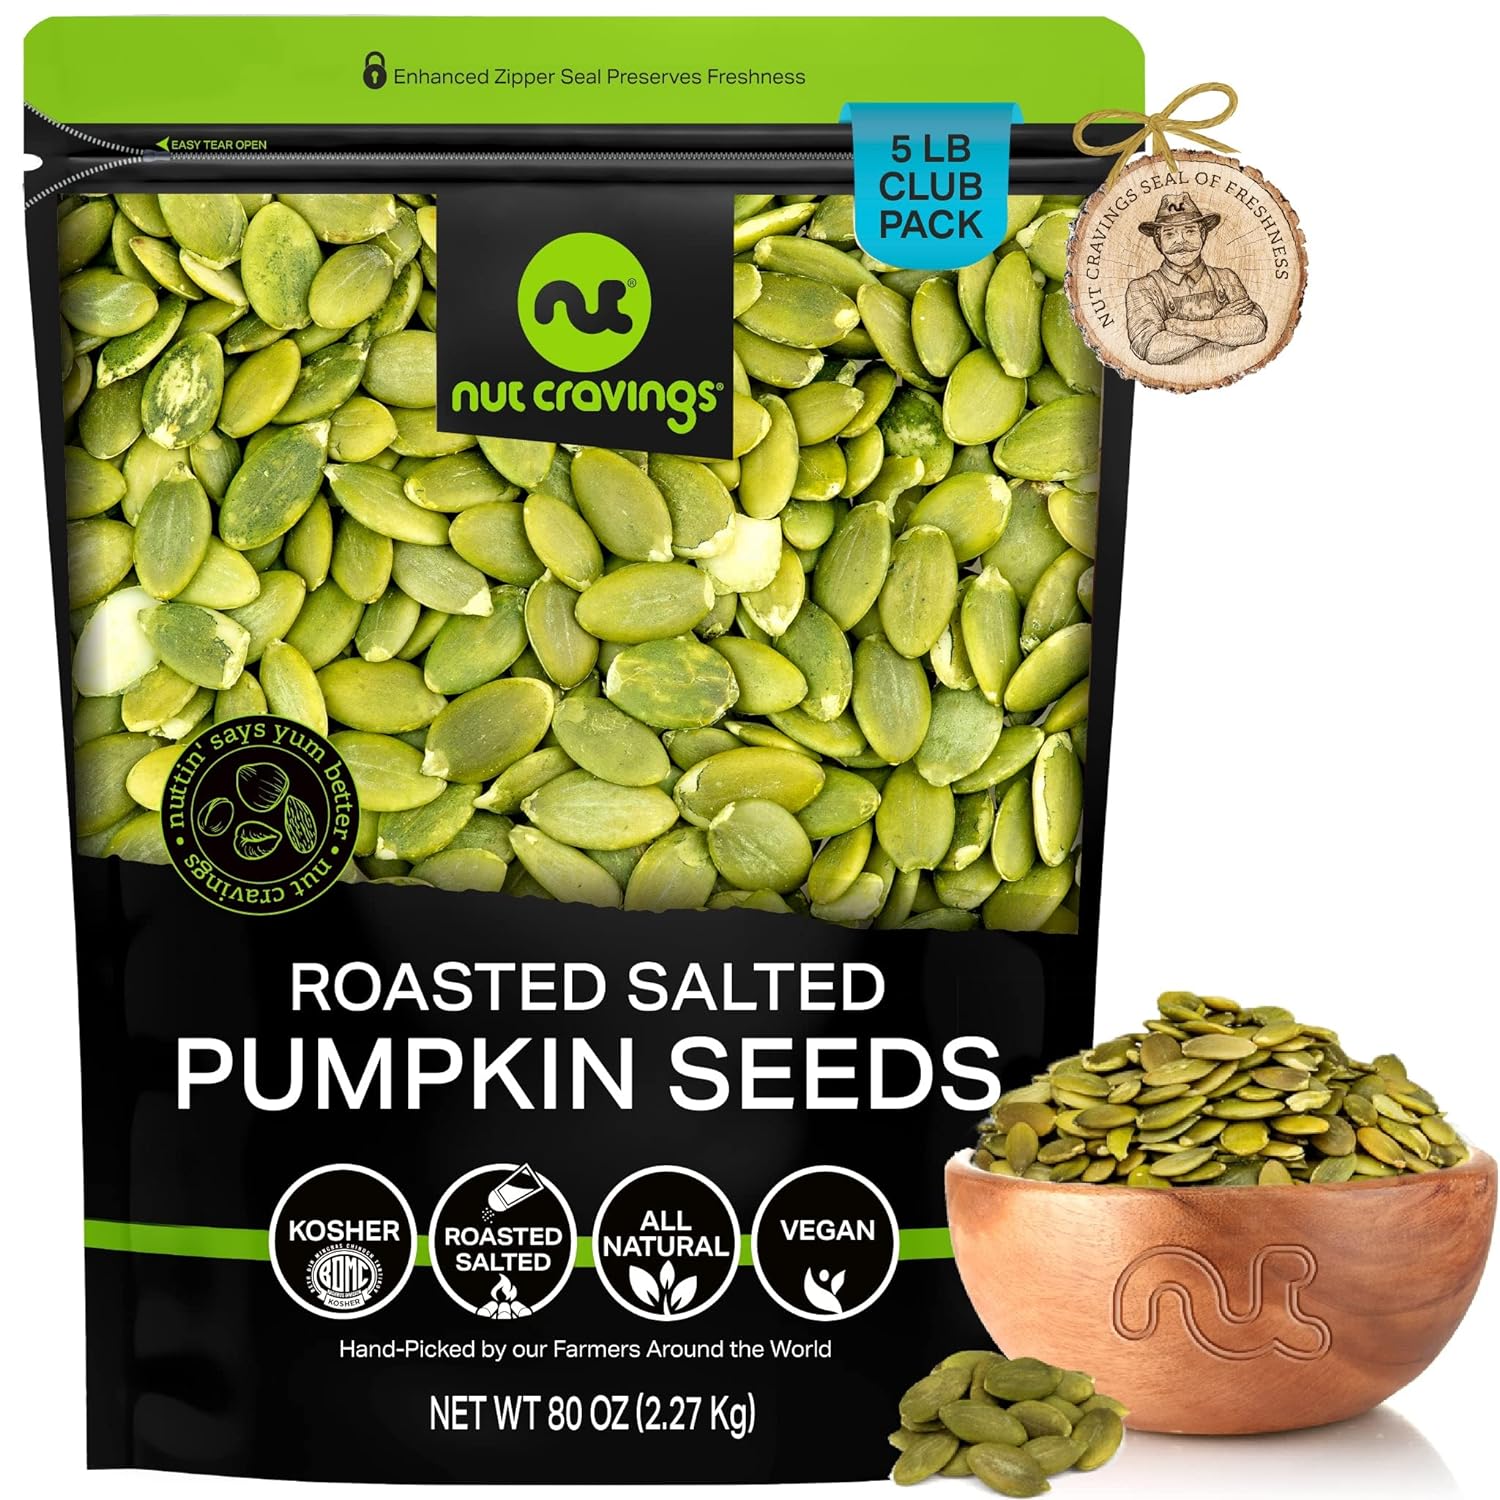 Nut Cravings - Roasted & Salted Pumpkin Seeds, Pepitas, No Shell (80oz - 5 LB) Packed Fresh in Resealable Bag - Nut Snack - Healthy Protein Food, All Natural, Keto Friendly, Vegan, Kosher